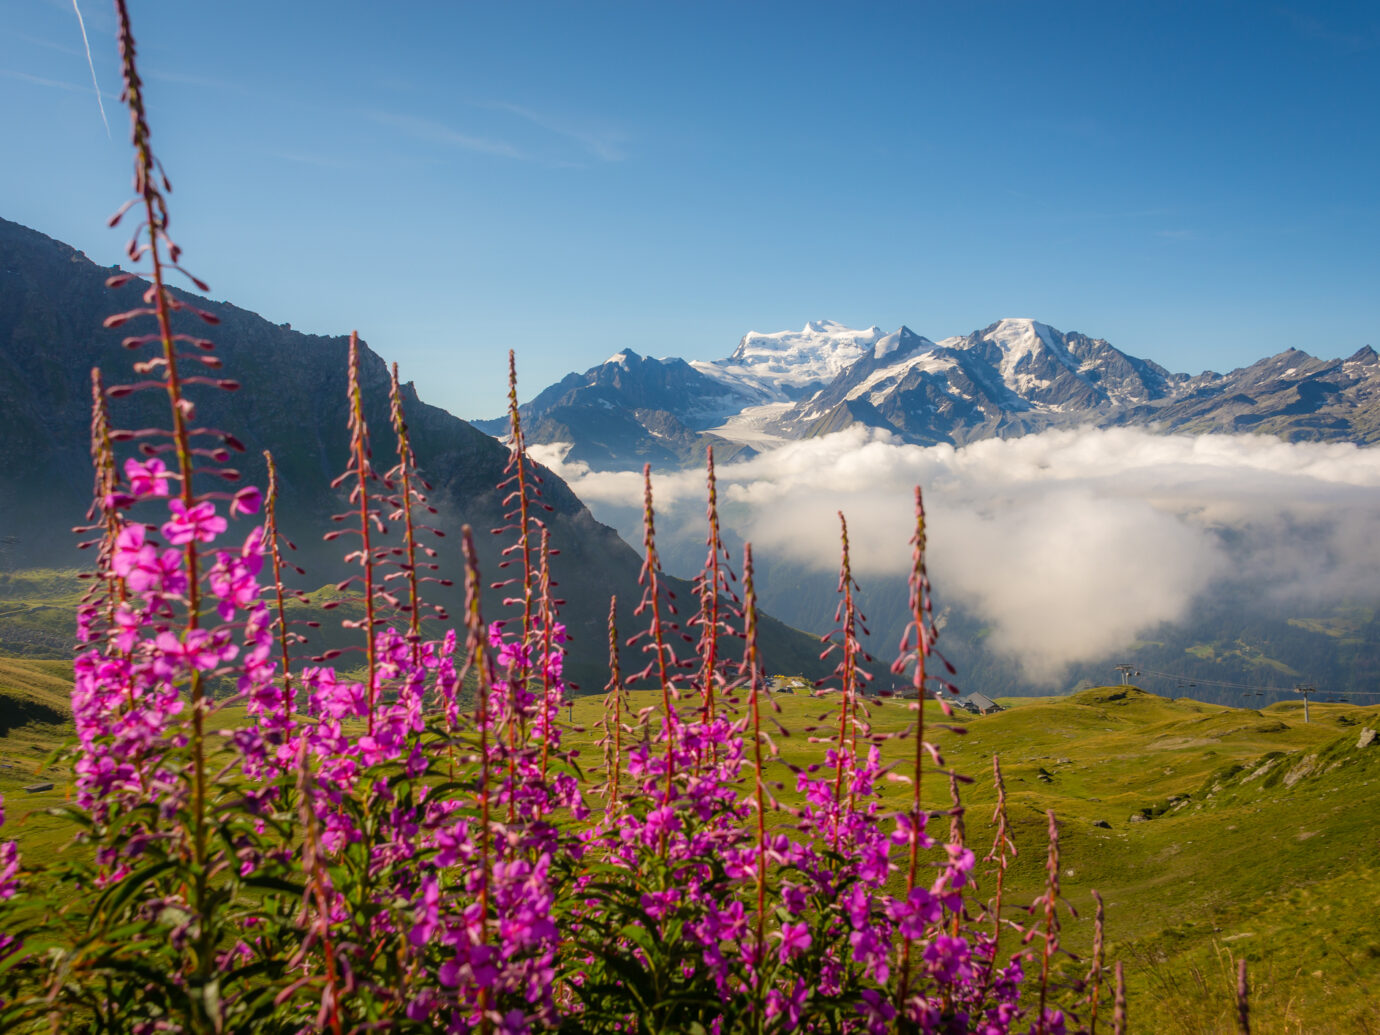 Purple fireweed flowers growing in a meadow above the tourist destination of Verbier in the Swiss alps.